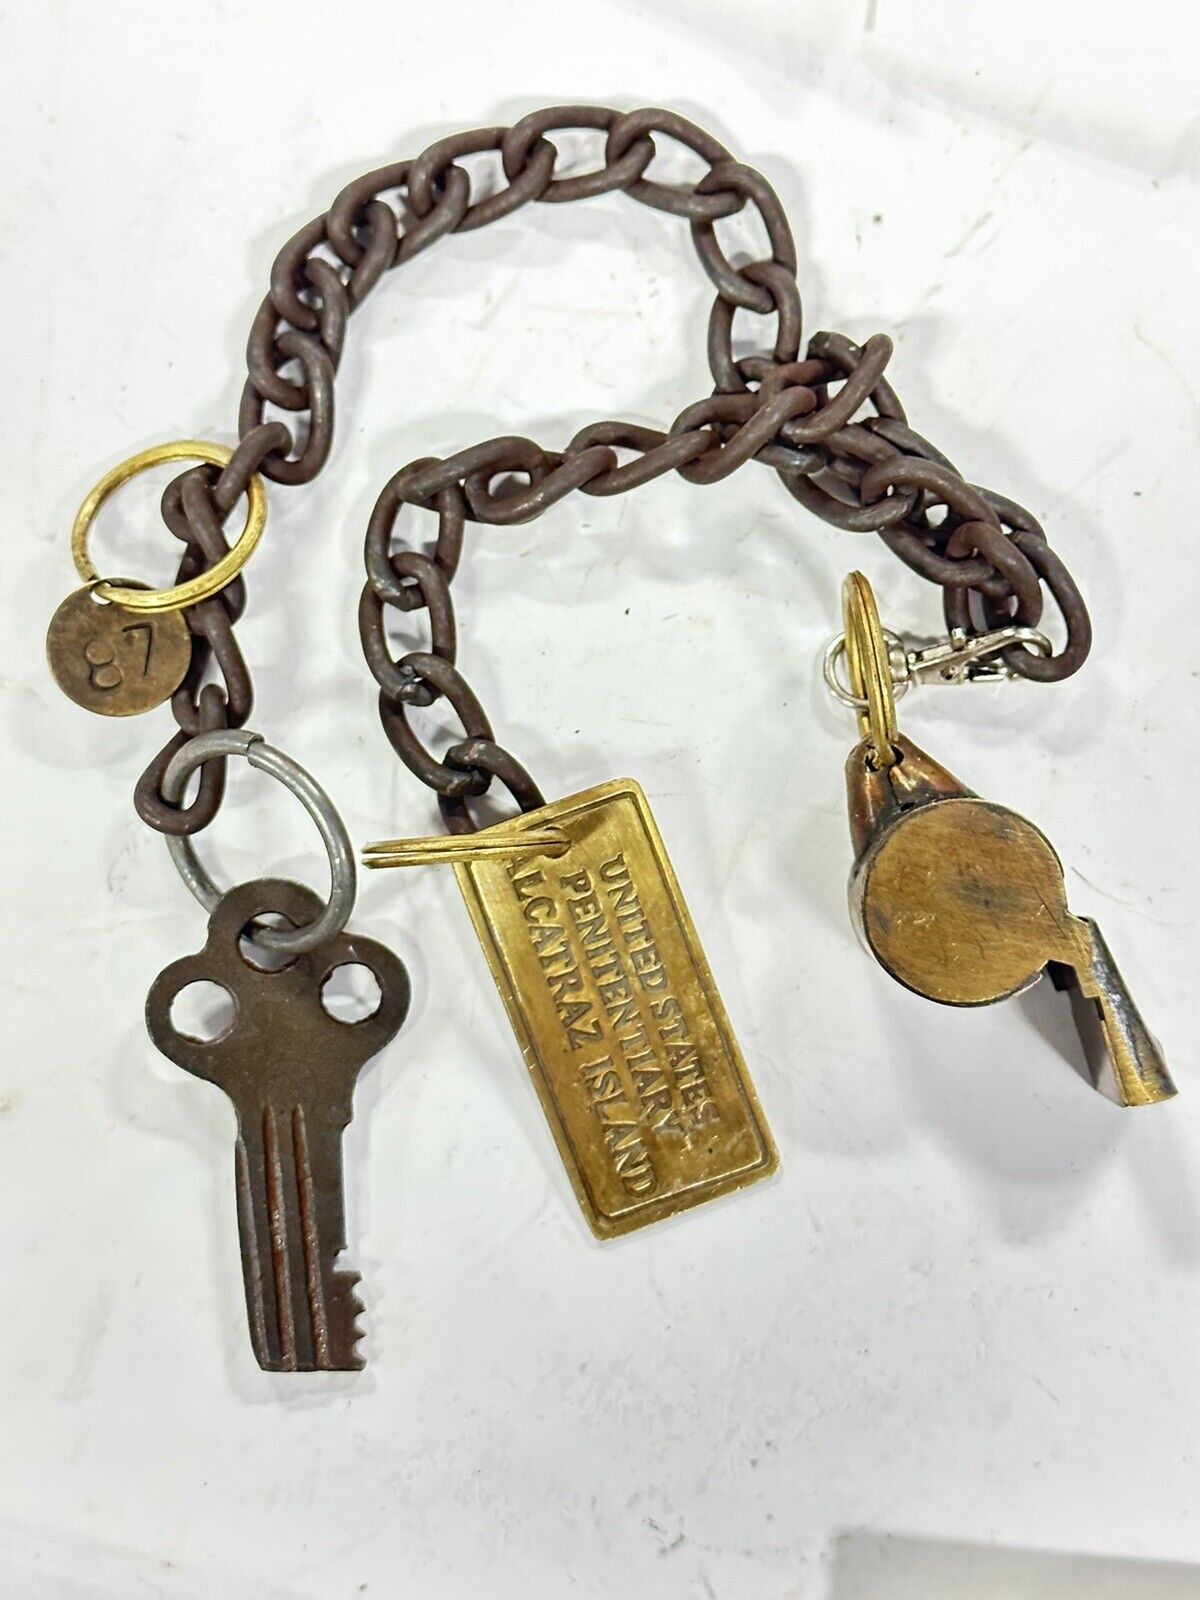 Alcatraz Island Penitentiary Guard Iron Cell Key, Tag & Solid Brass Whistle